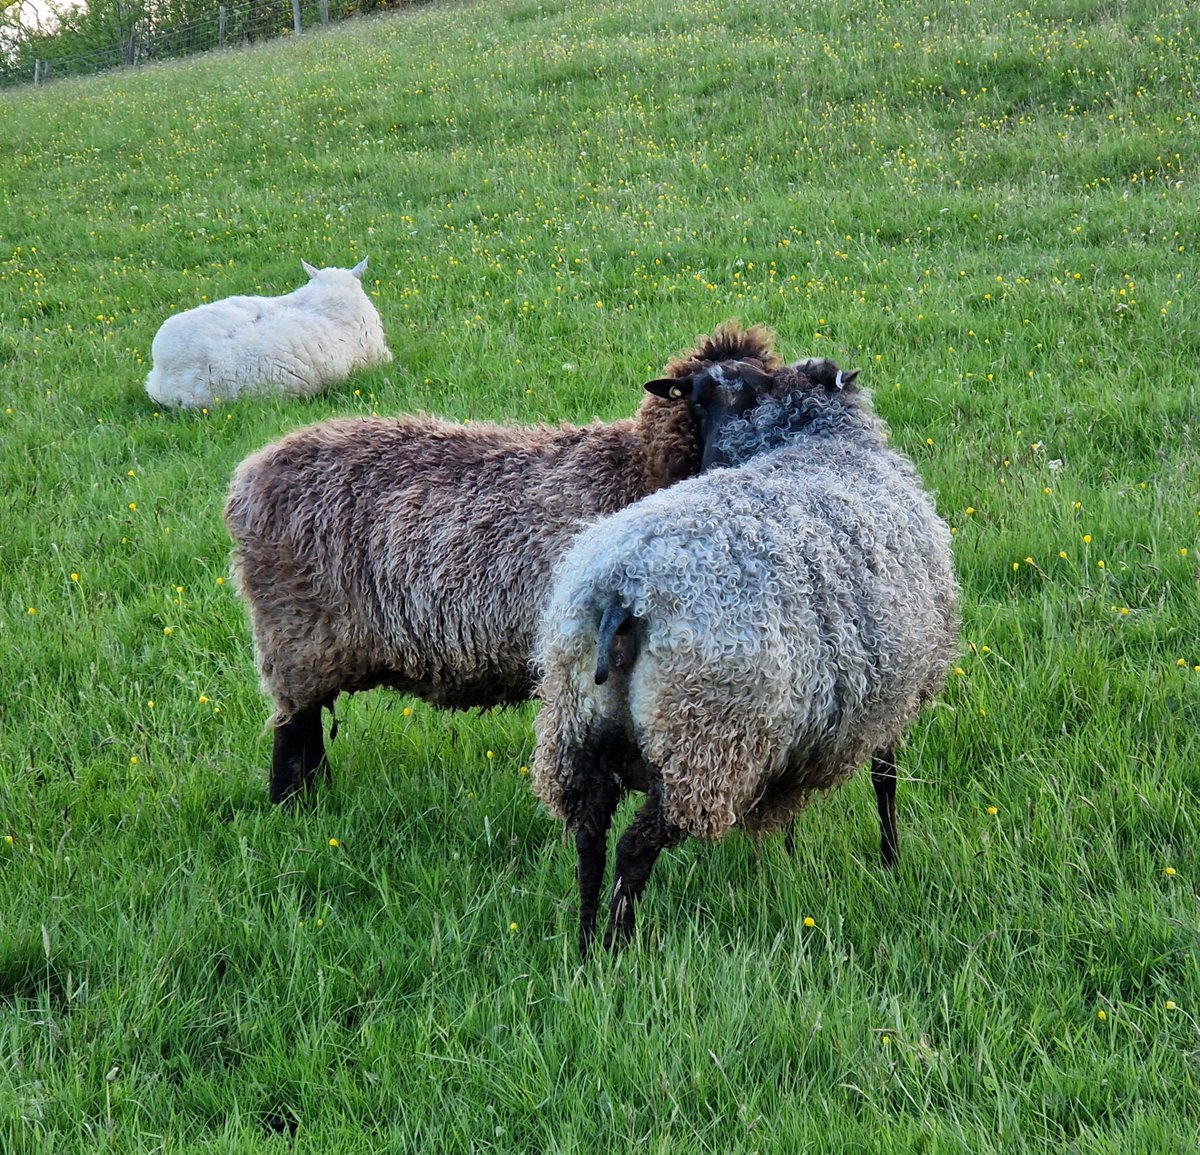 Catrin and Kiss sharing a moment of friendship and probably a bit of highly confidential gossip!!

#animalsanctuary #sheep365 #sheep #springtime #friendship #animallovers #foreverhome #nonprofit #amazonwishlist #sponsorasheep 

woollypatchworksheepsanctuary.uk